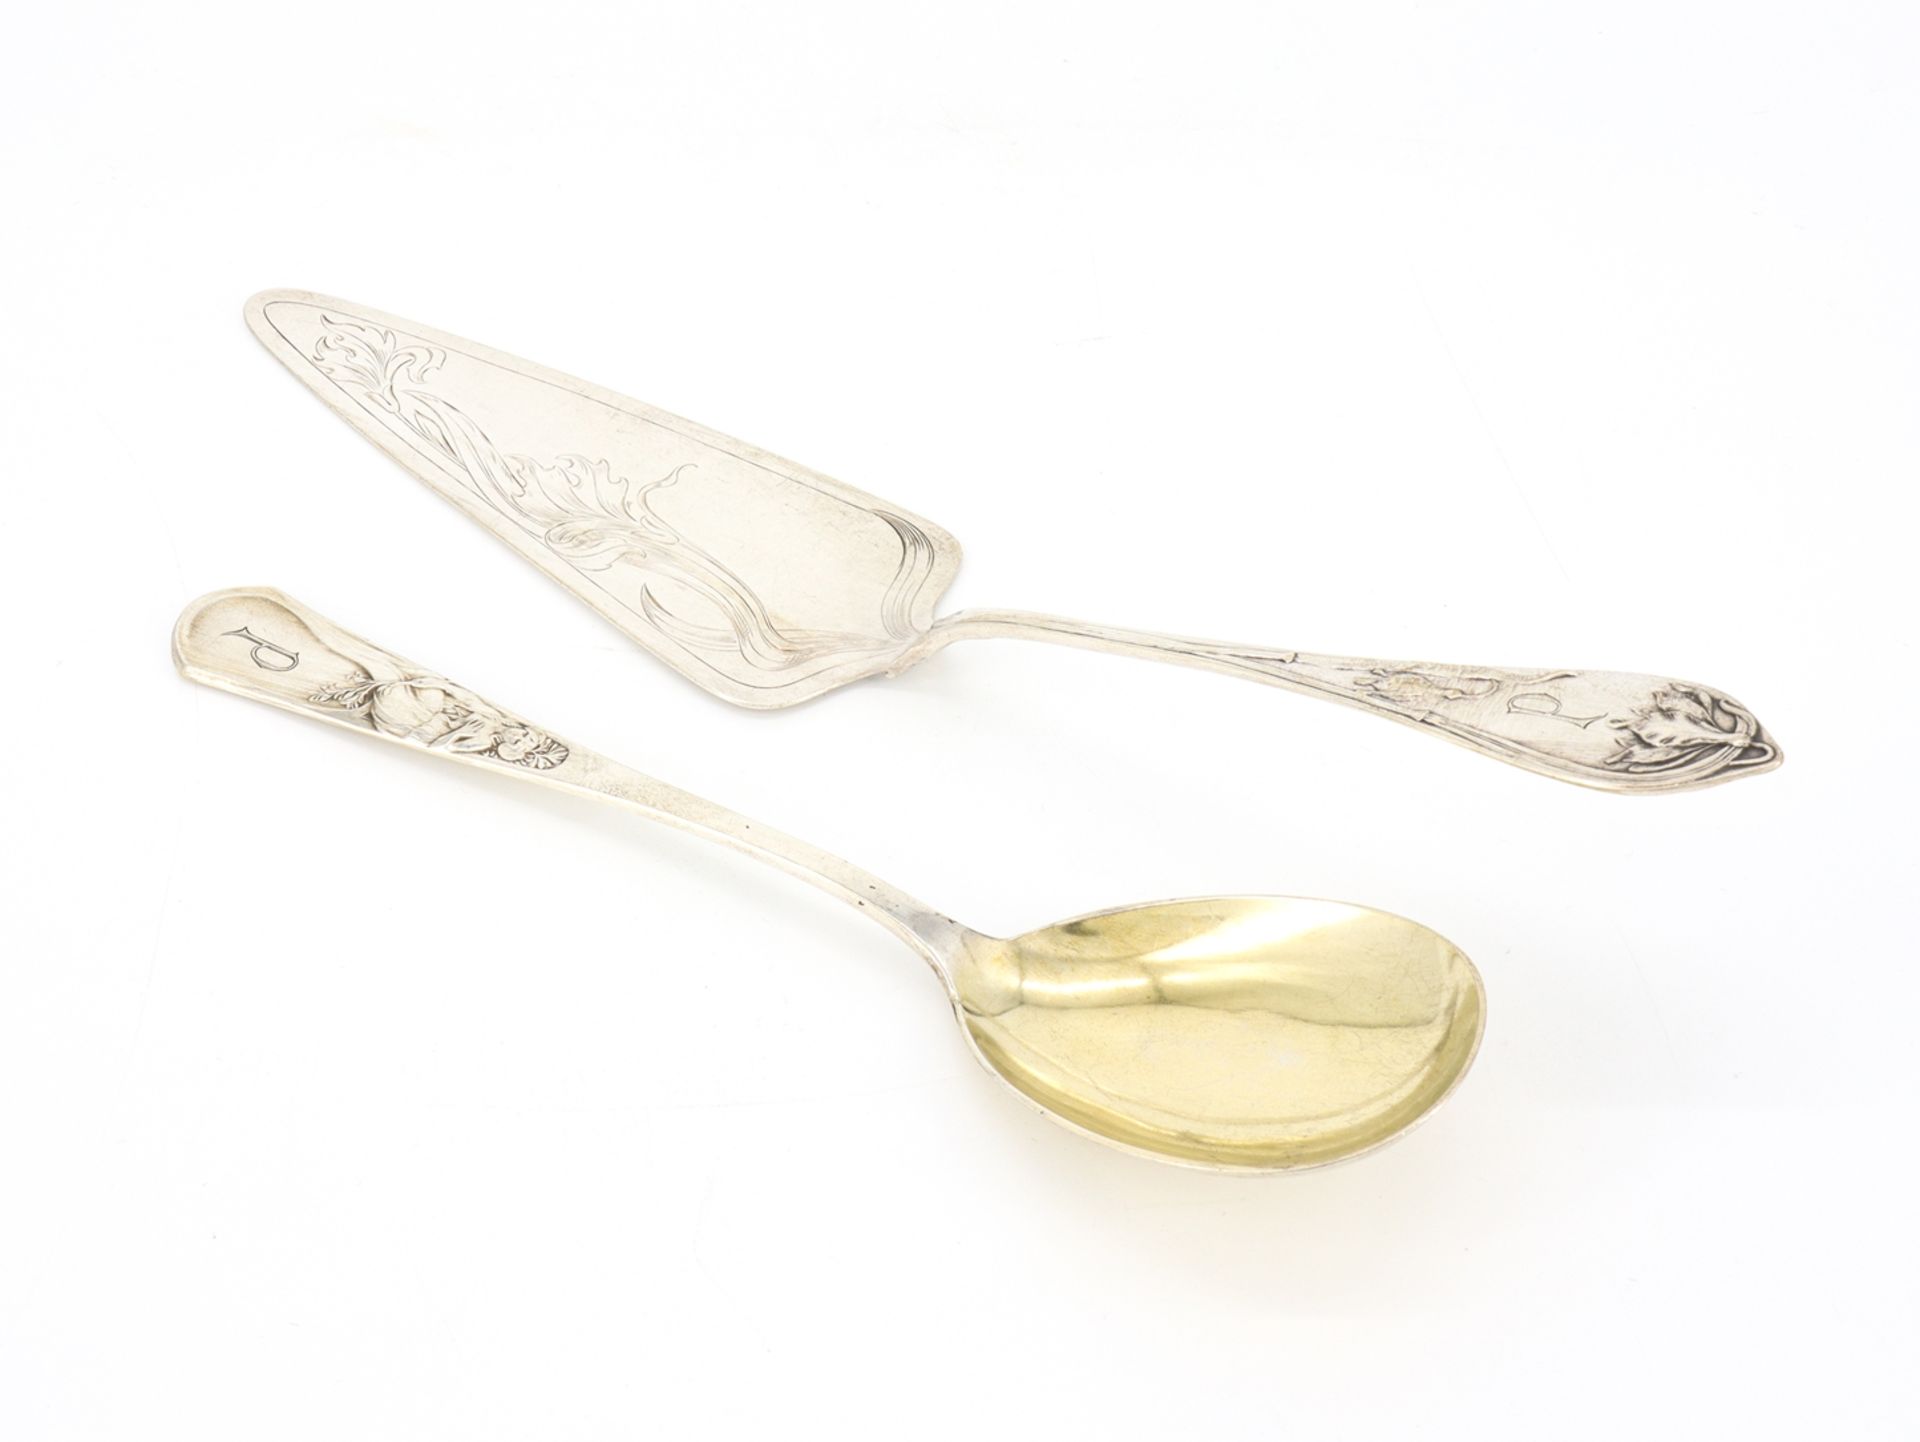 2 pieces of cutlery in finest art nouveau 800 silver circa 1900. - Image 3 of 8